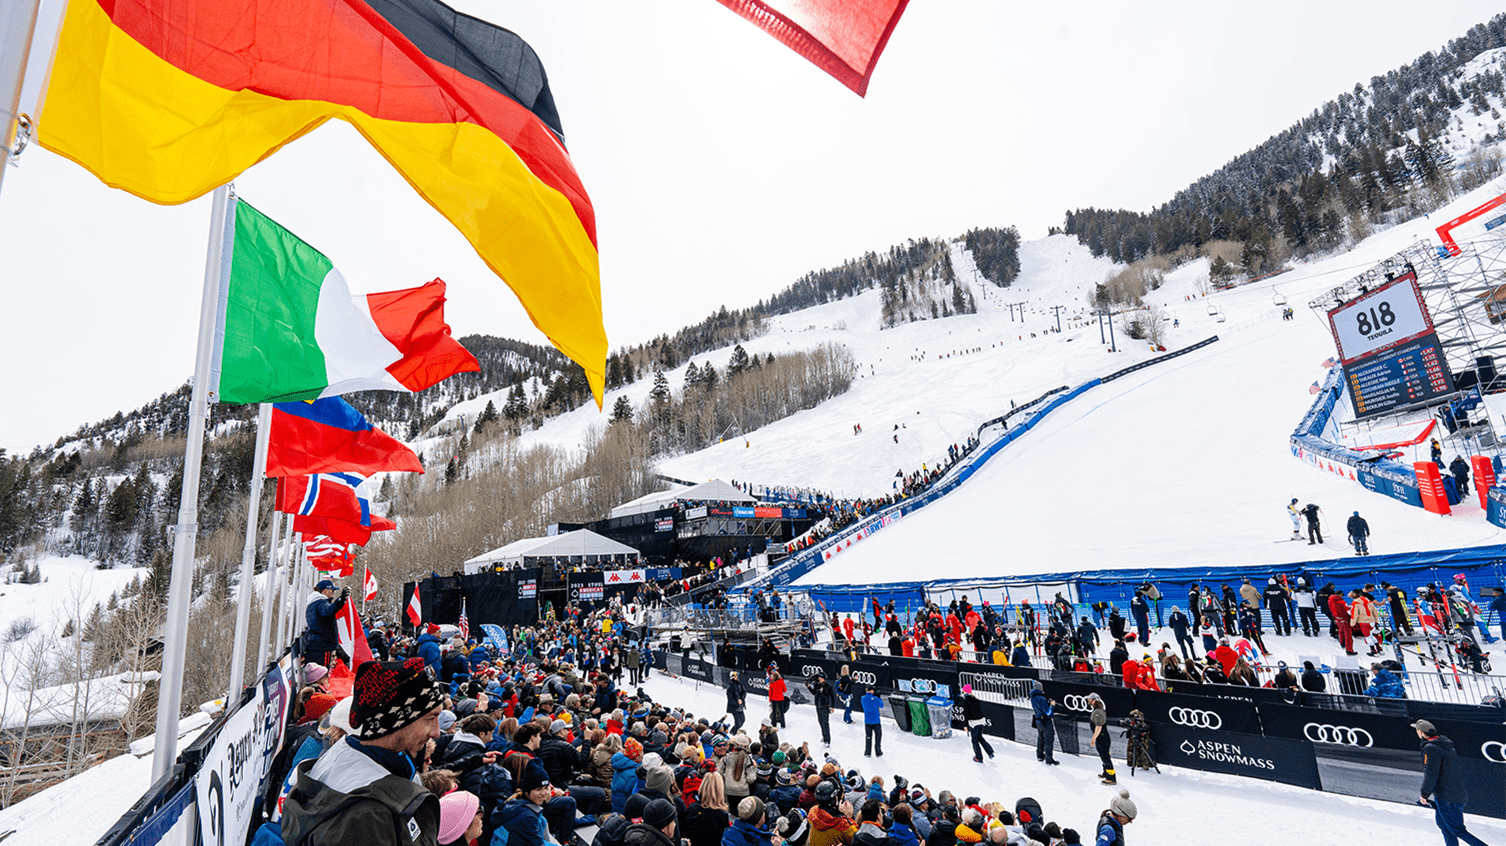 Grand Stand at Aspen Snowmass World Cup event